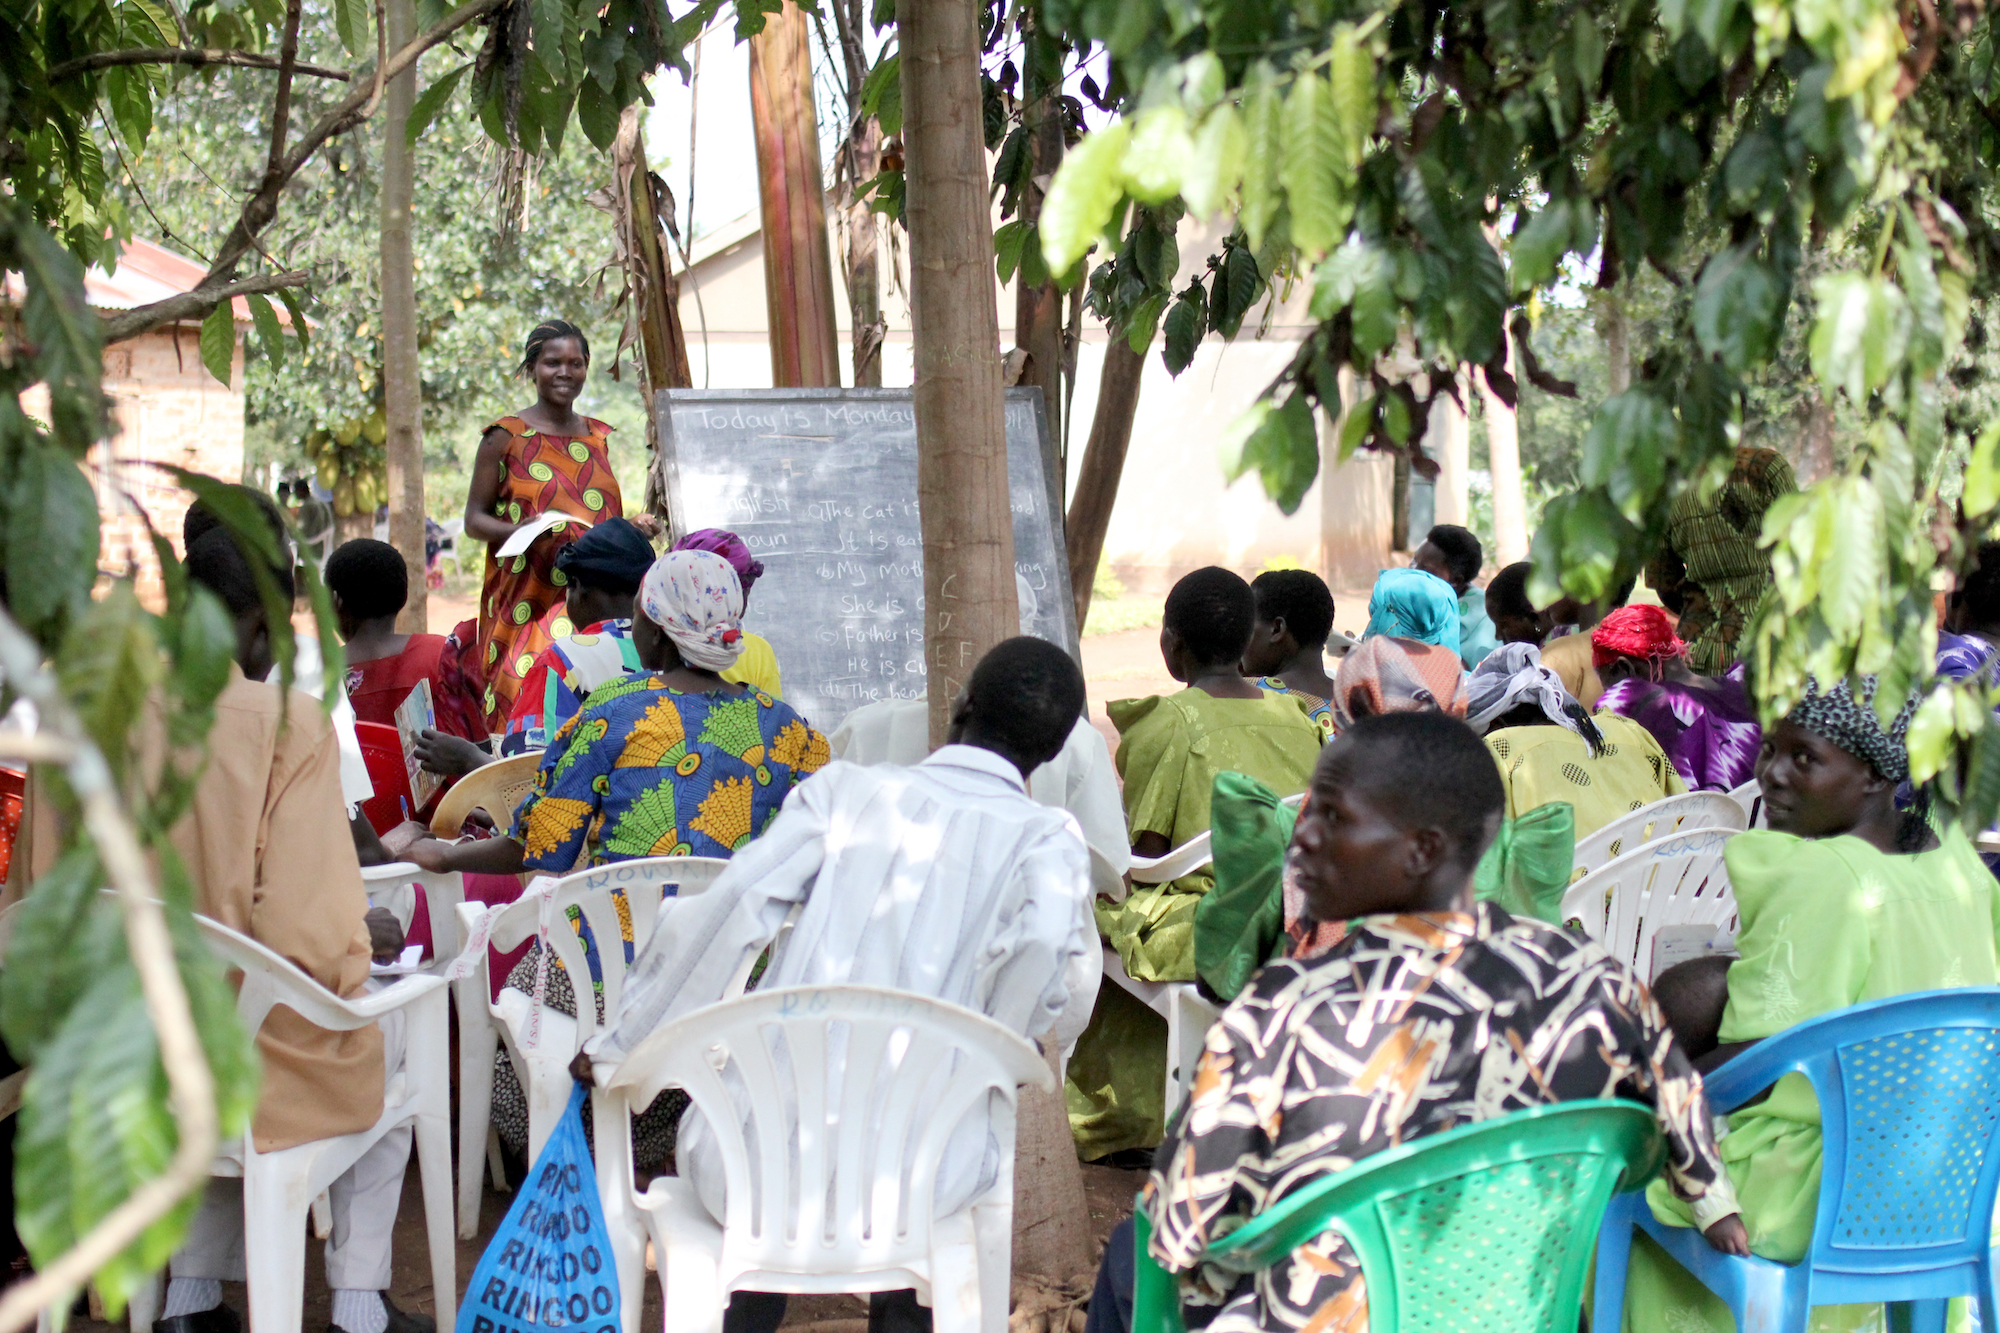 A group of women learning in an outdoor classroom